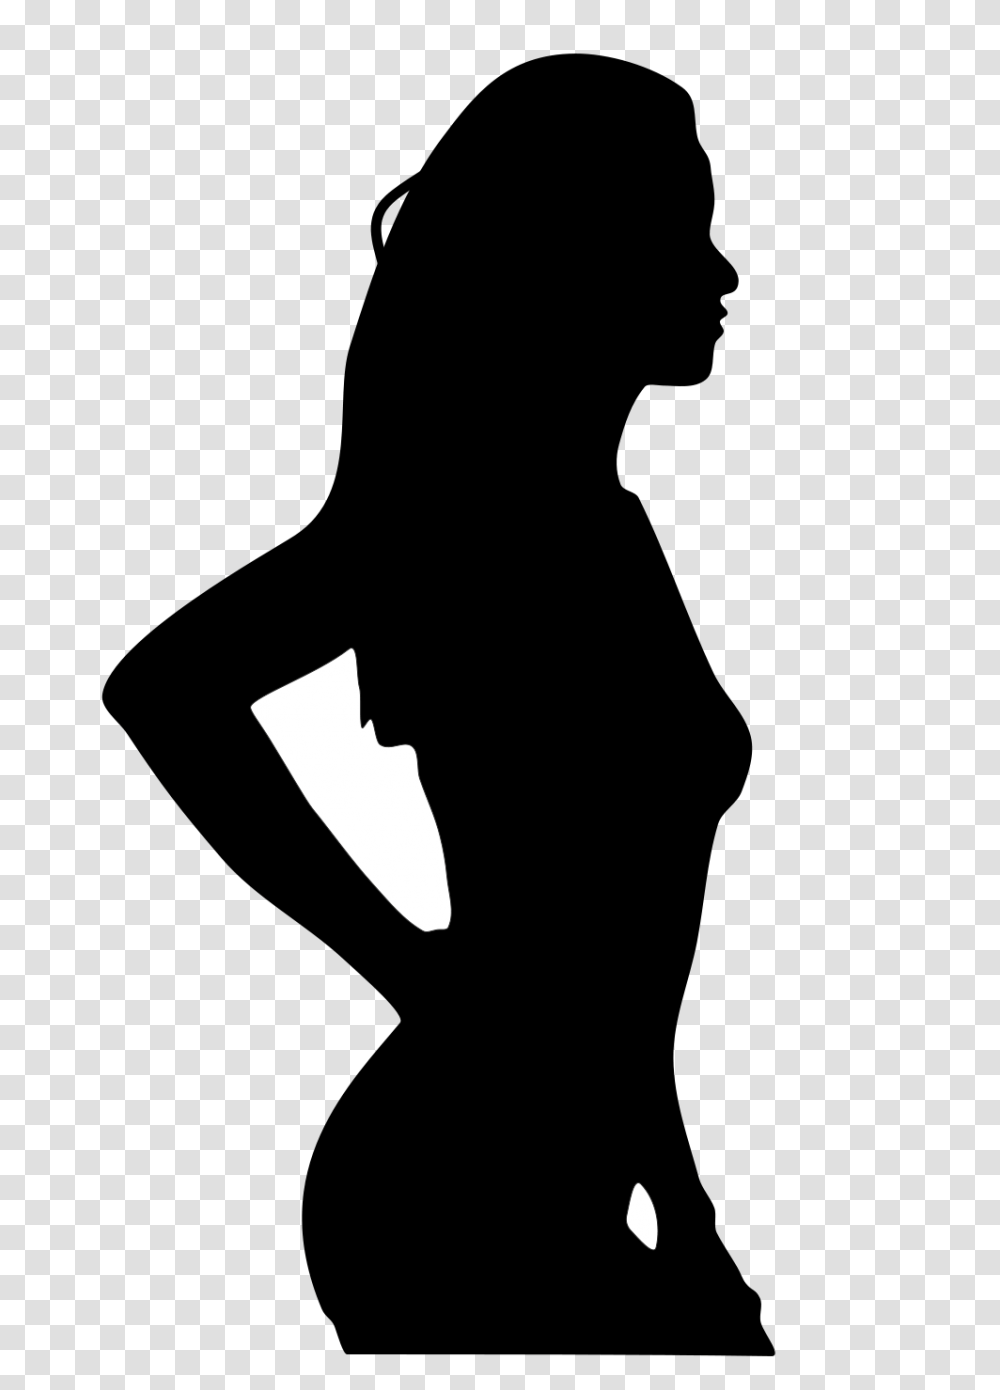 Silhouette Of Woman In Bikini, Stencil, Pillow, Triangle Transparent Png